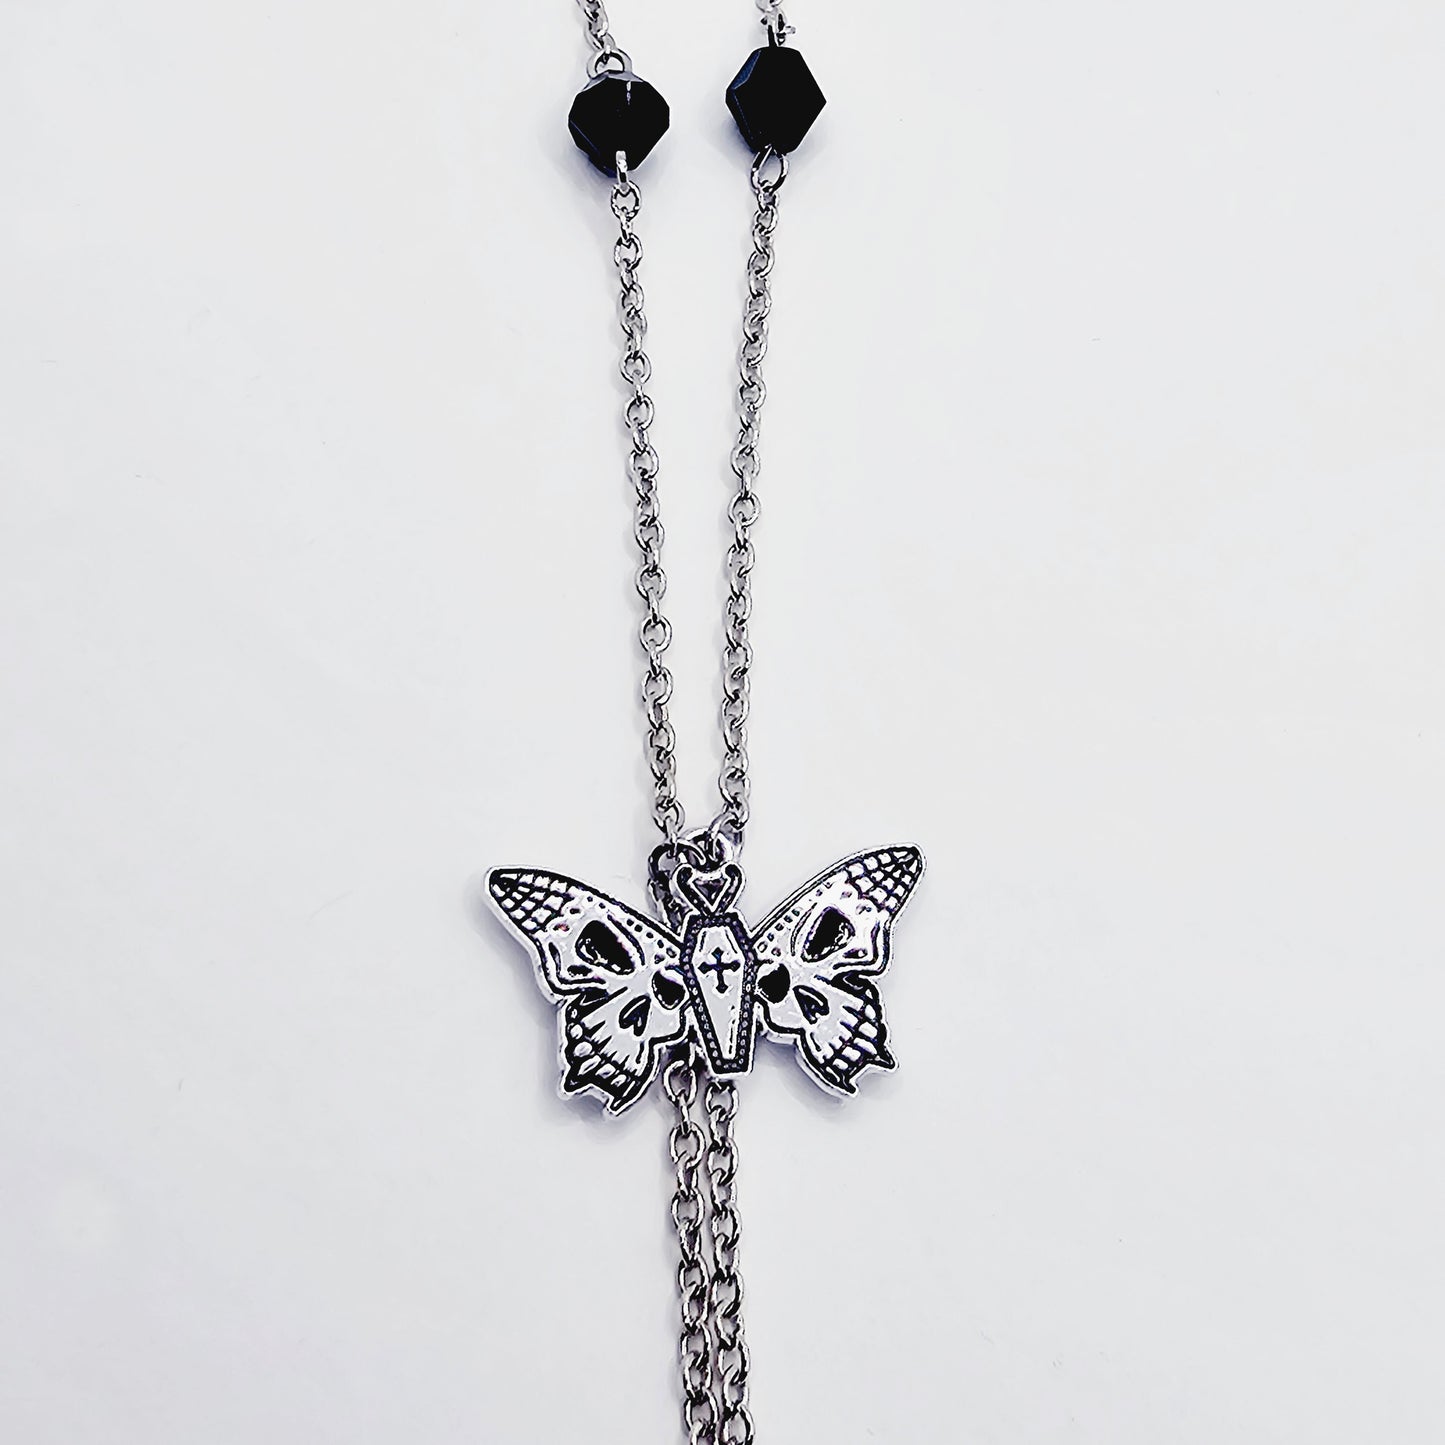 Necklace to Nipple with Butterfly Skulls and Black Crystals, with Non Piercing Nipple Nooses, Rings, or Nipple Clamp Options.